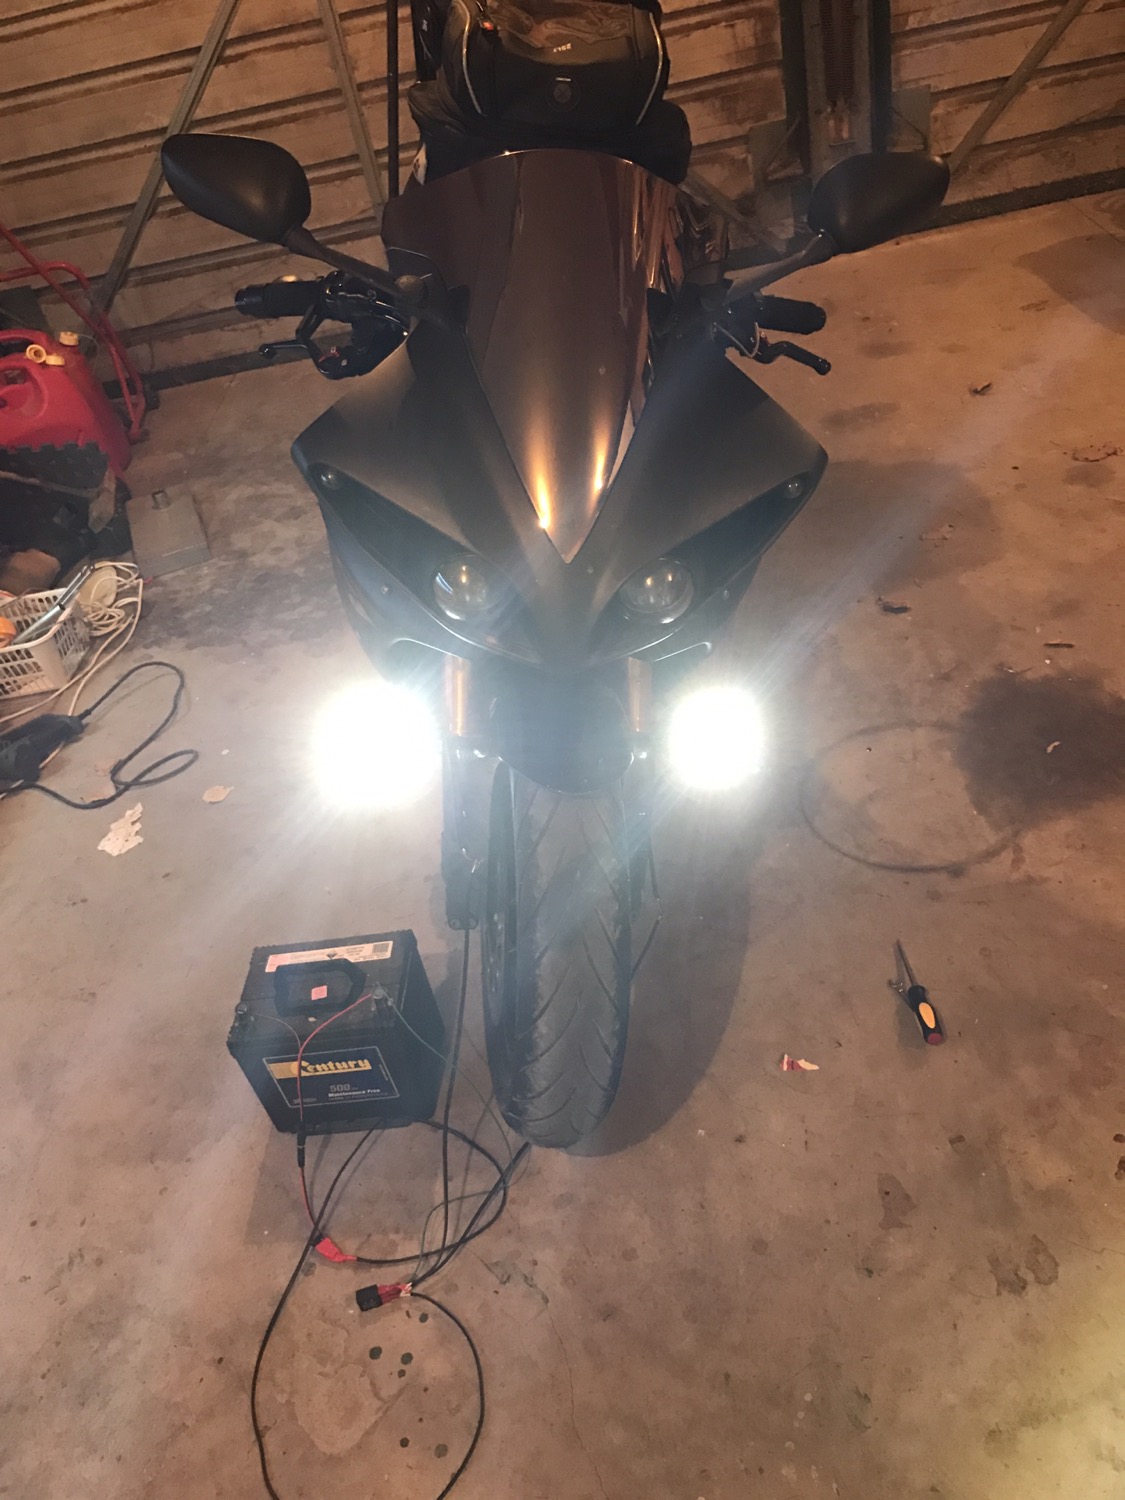 Flicker lights on R1 changed to use MOSFET